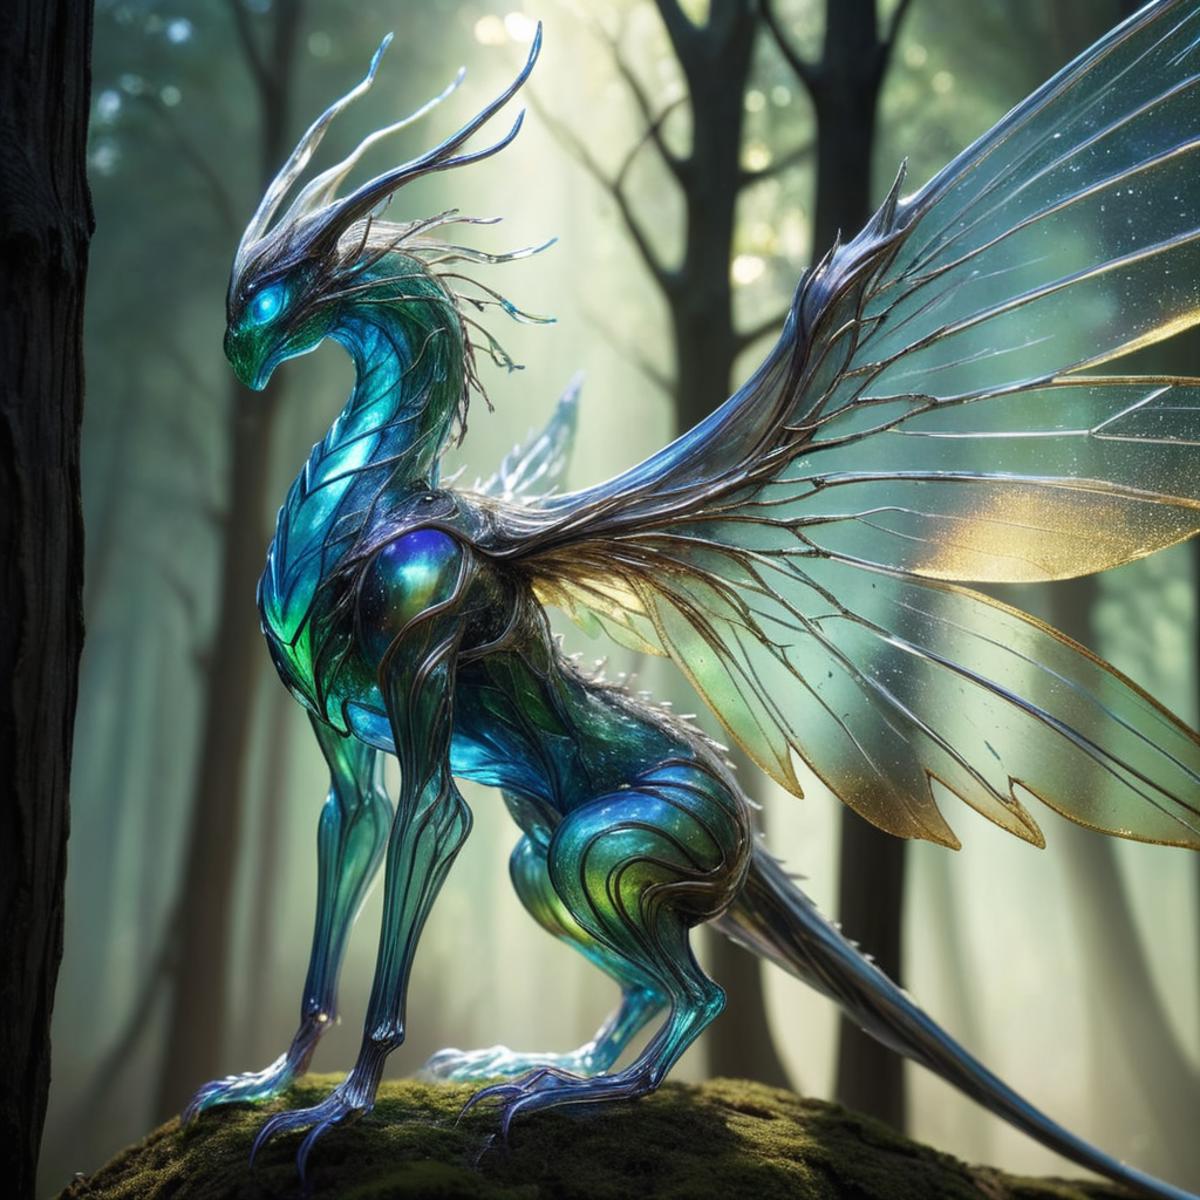 An artistic dragon sculpture with bright blue coloring and intricate design, standing on a mossy rock in a forest setting.